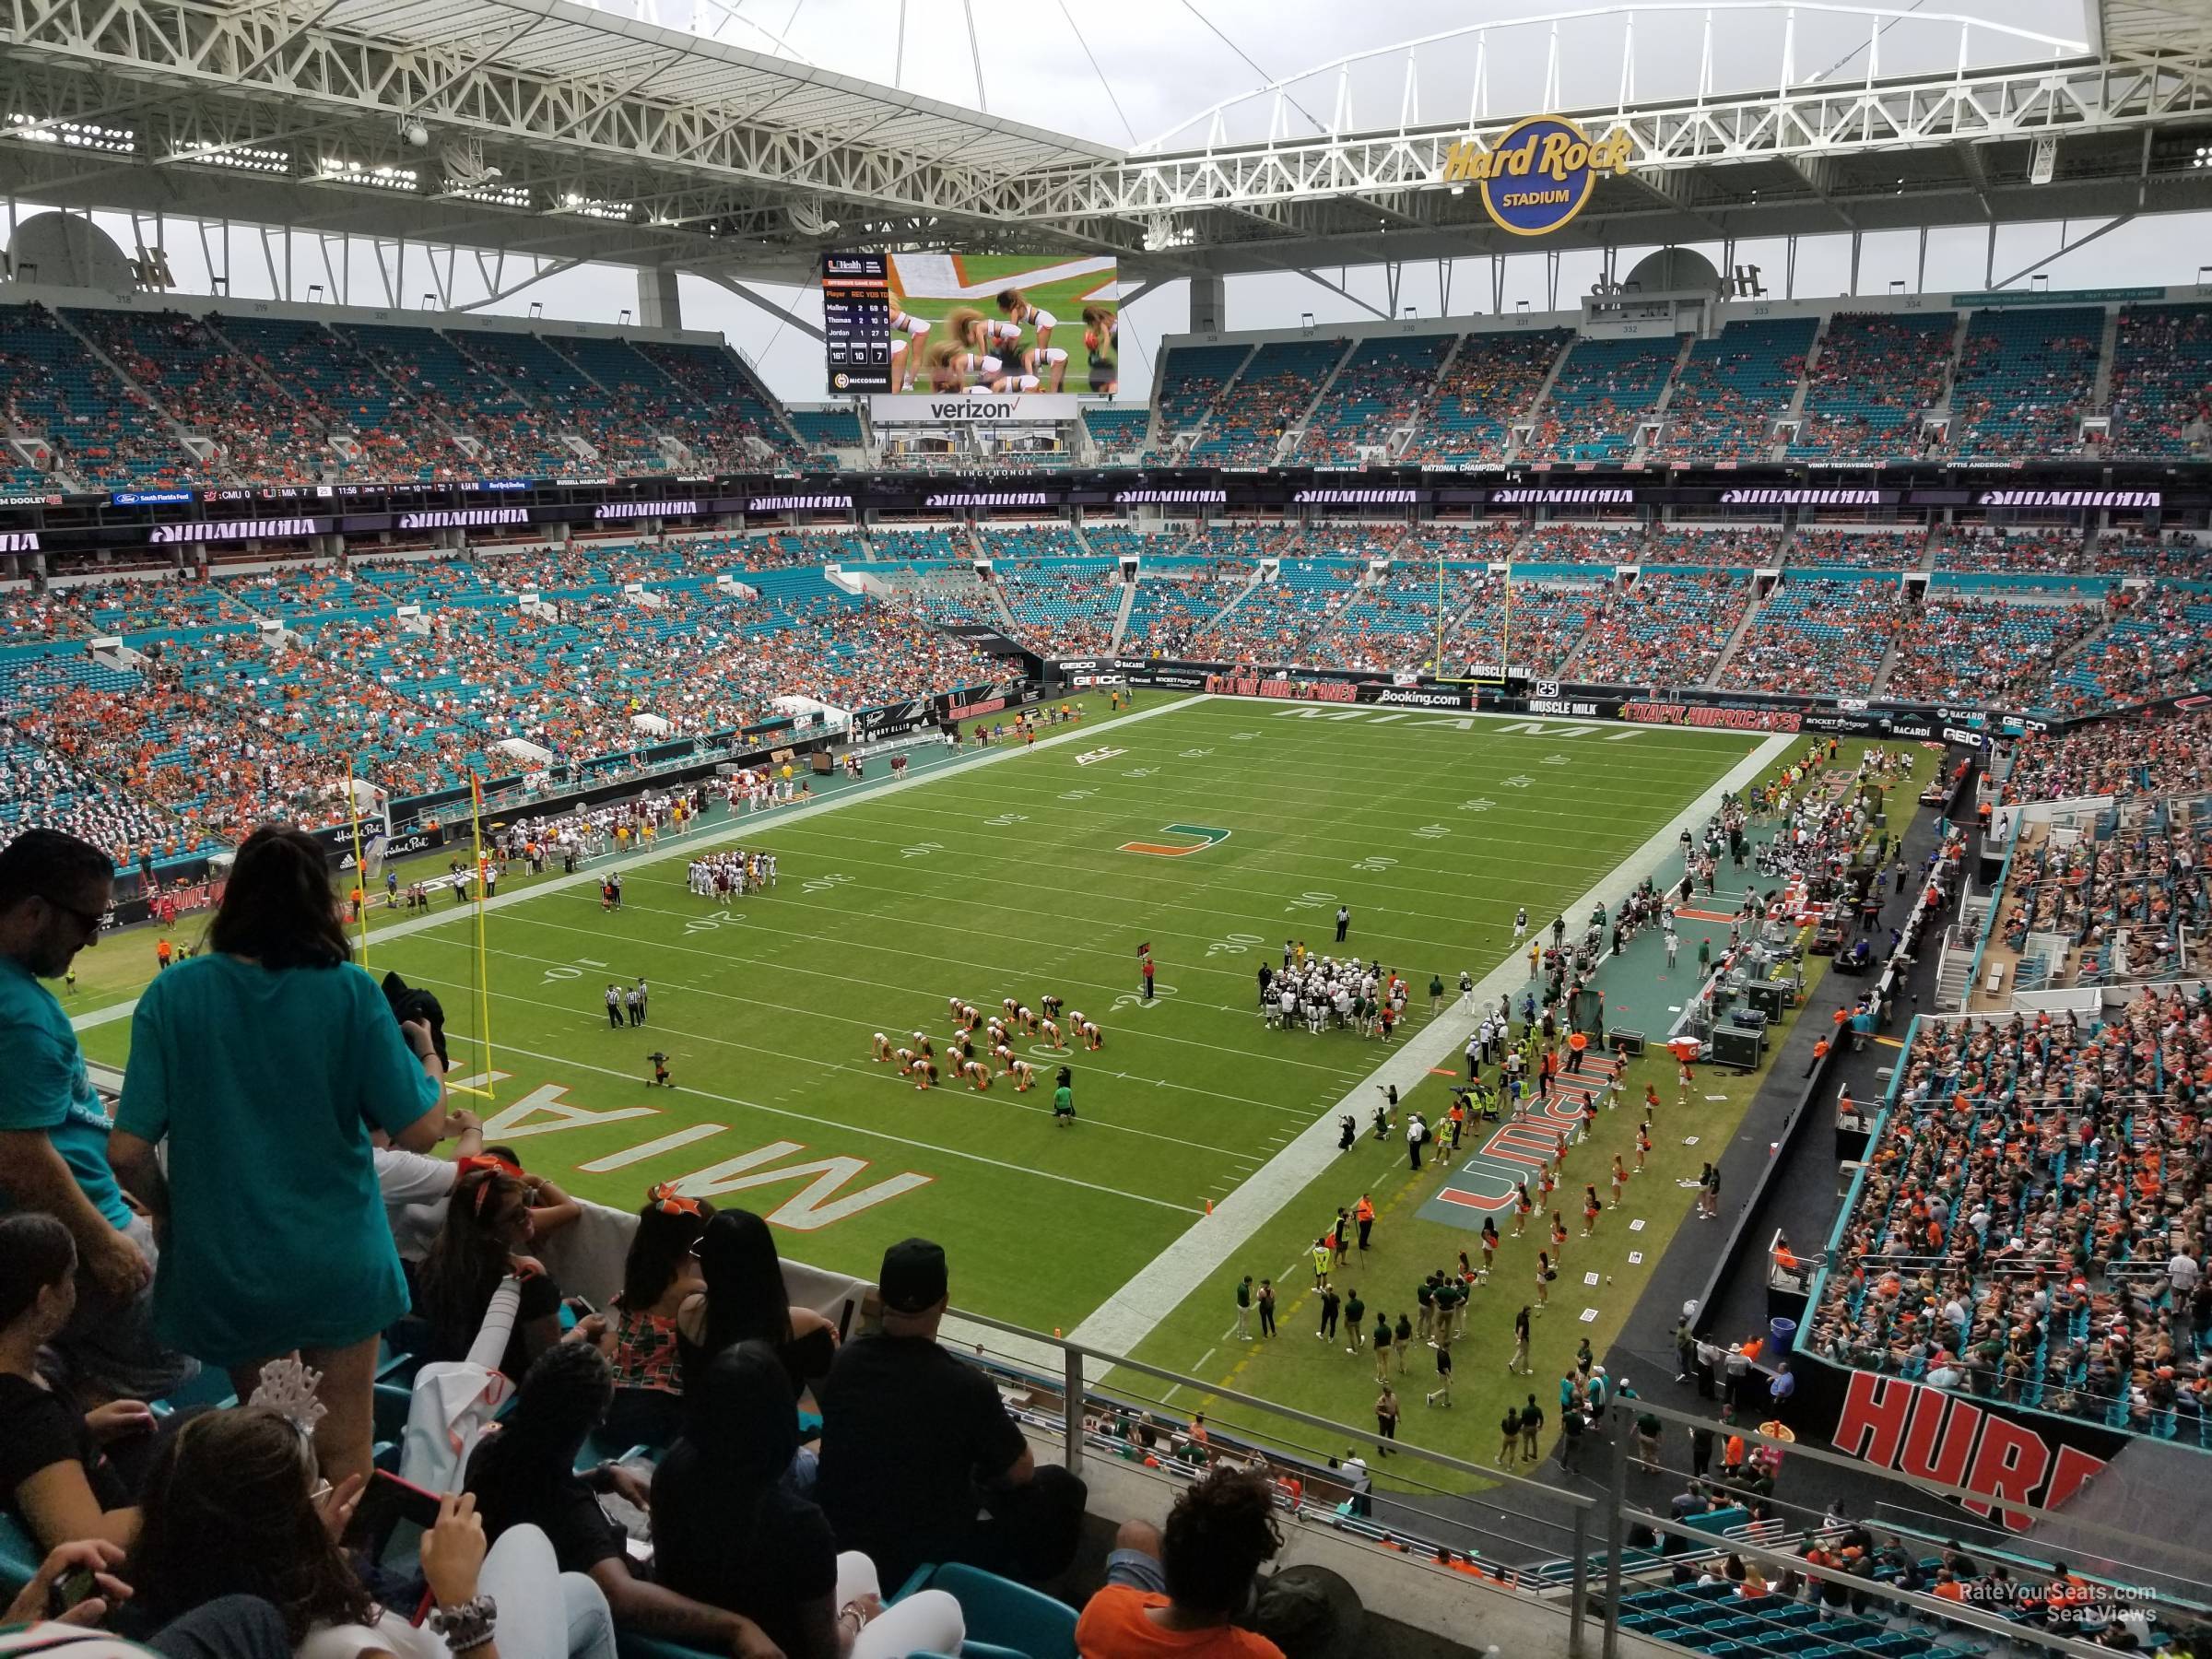 section 301, row 5 seat view  for football - hard rock stadium